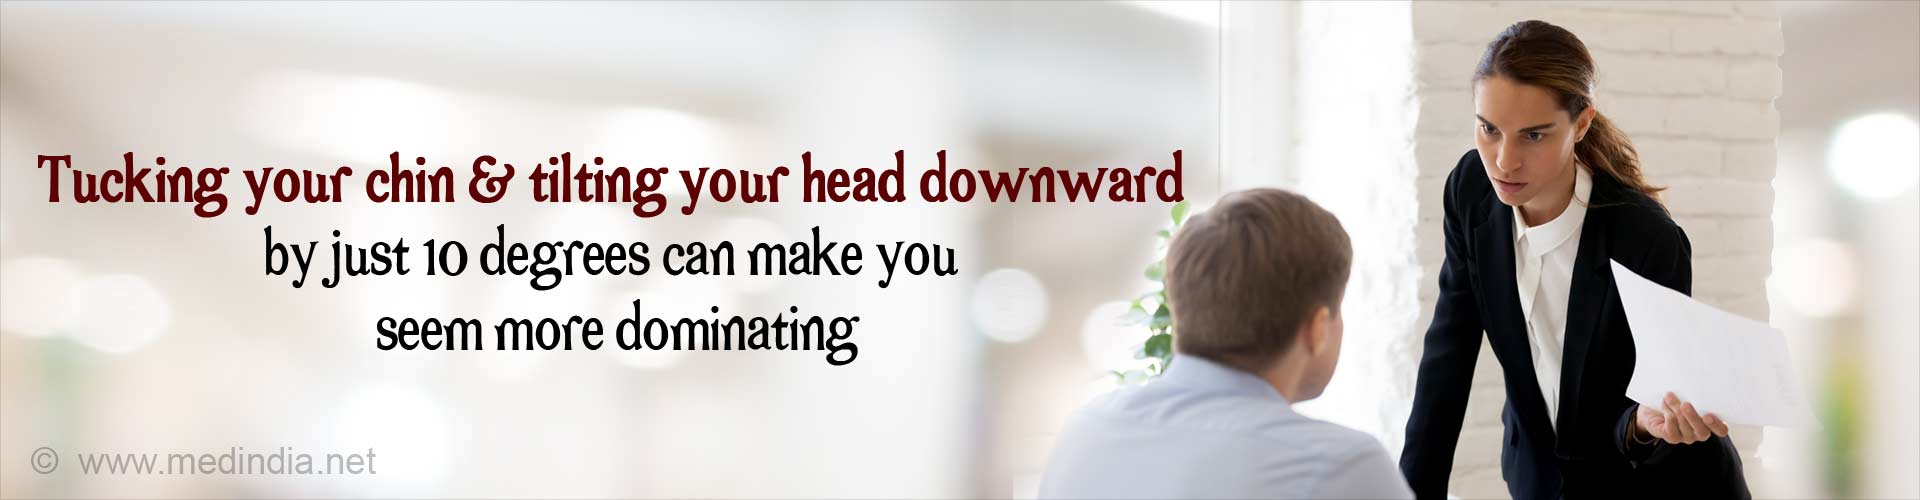 Tucking your chin and tilting your head downward by just 10 degrees can make you seem more dominating.